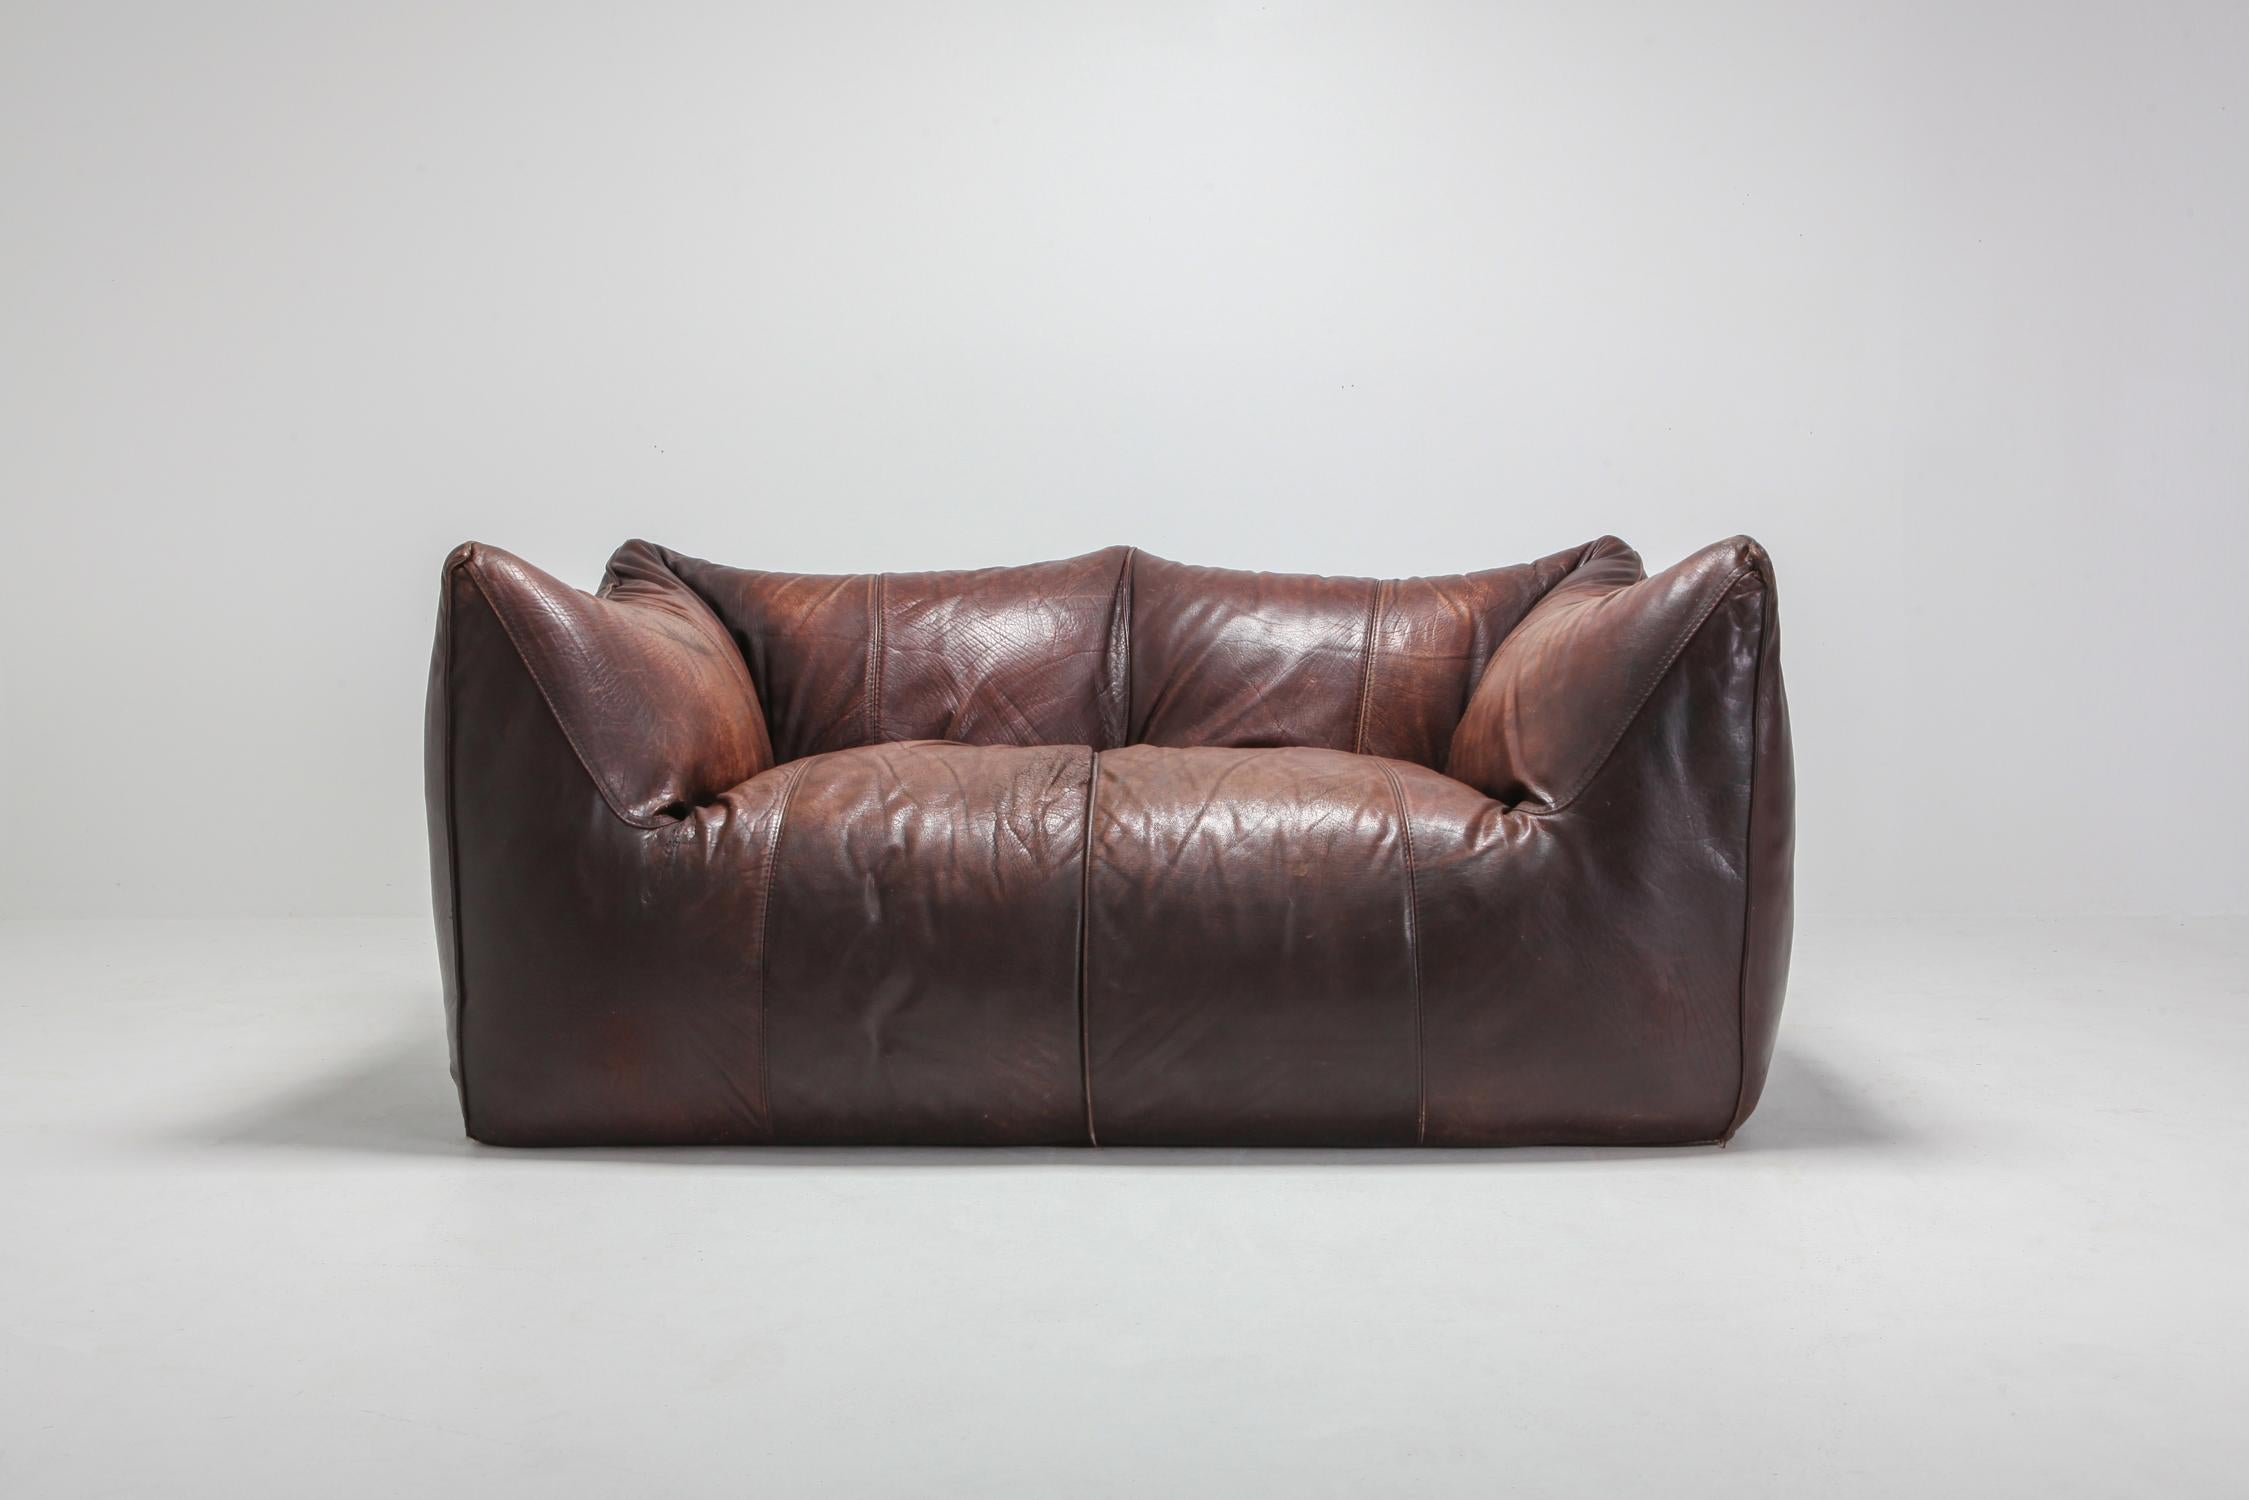 Mario Bellini for B&B Italia, 'Le Bambole' sofa, brown patinated leather, Italy, 1972. 

This piece is one of the very rare prototypes or early editions, and still 100% original, read on.

In the Bambole, the piece is reduced to an archetypical